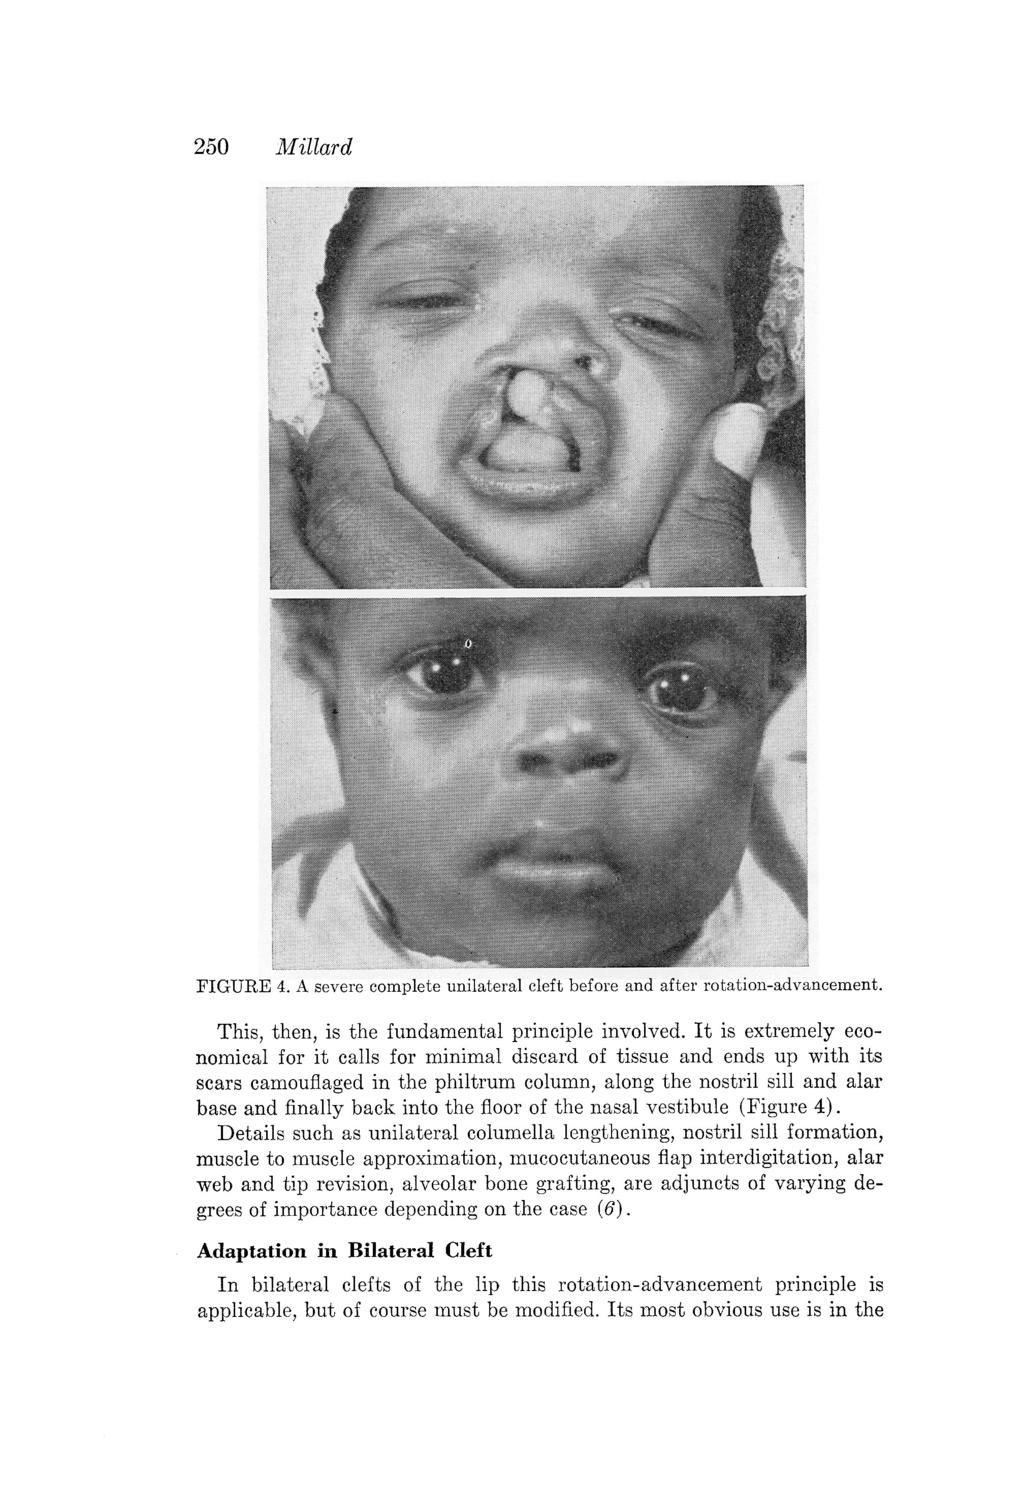 250 Millard FIGURE 4. A severe complete unilateral cleft before and after rotation-advancement. This, then, is the fundamental principle involved.